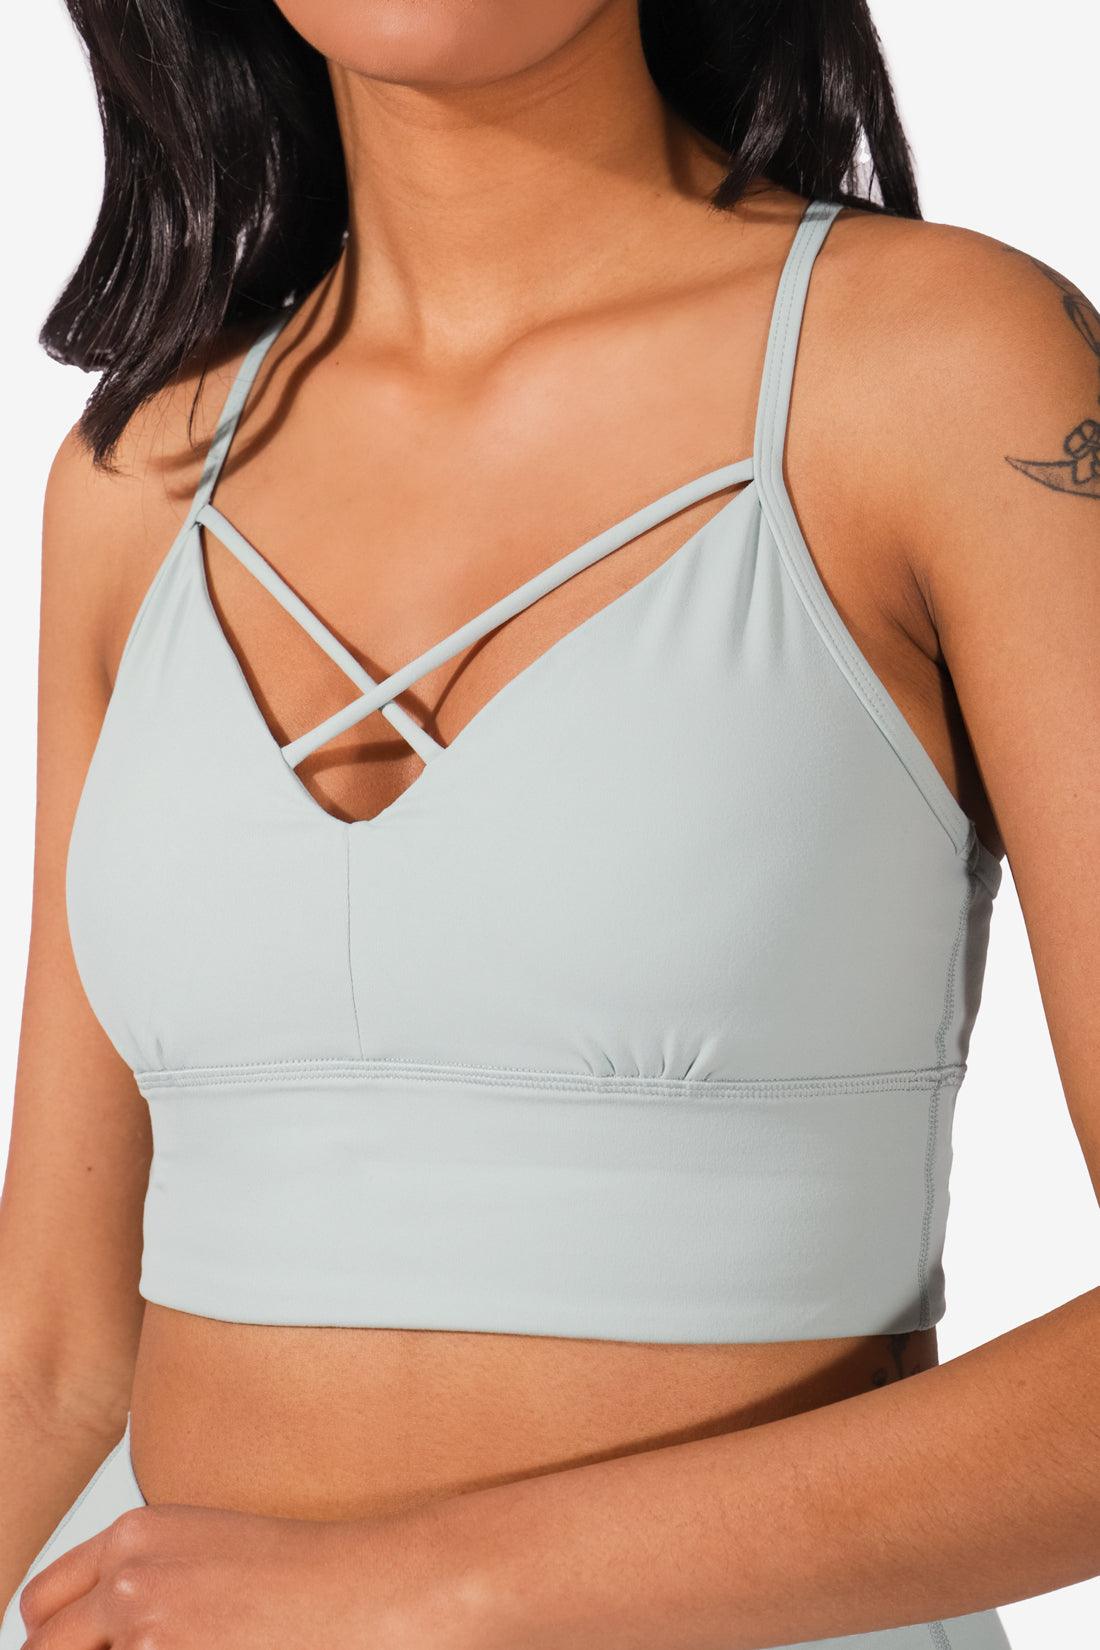 Extra 25% Off for Members: 100s of Styles Added Grey Sports Bras